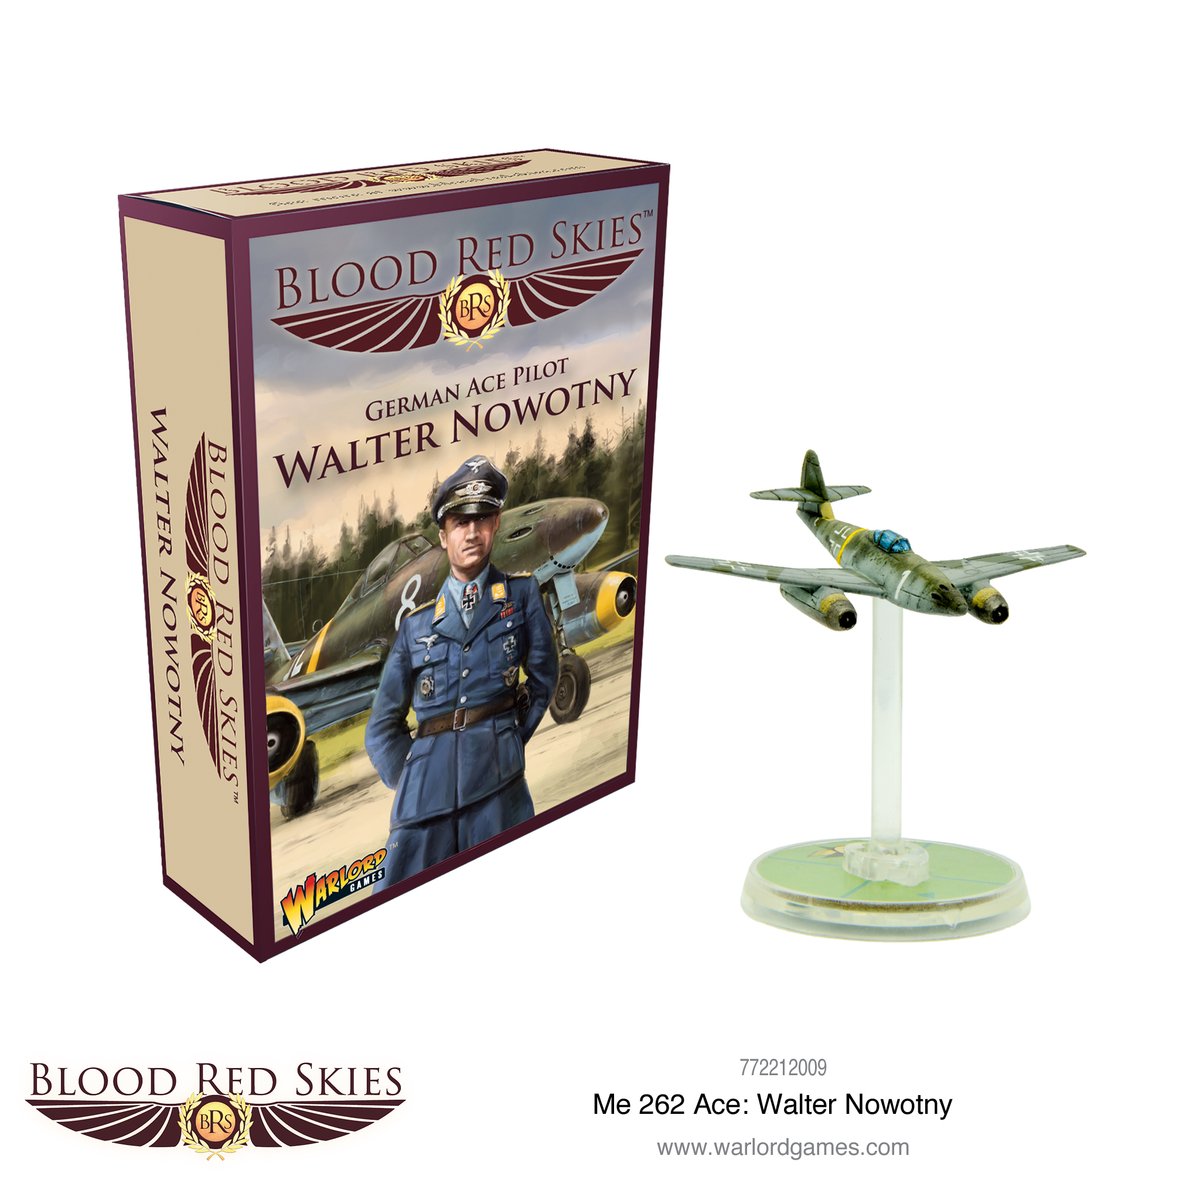 Messerschmitt Me 262 Ace: Walter Nowotny Blood Red Skies Warlord Games    | Red Claw Gaming